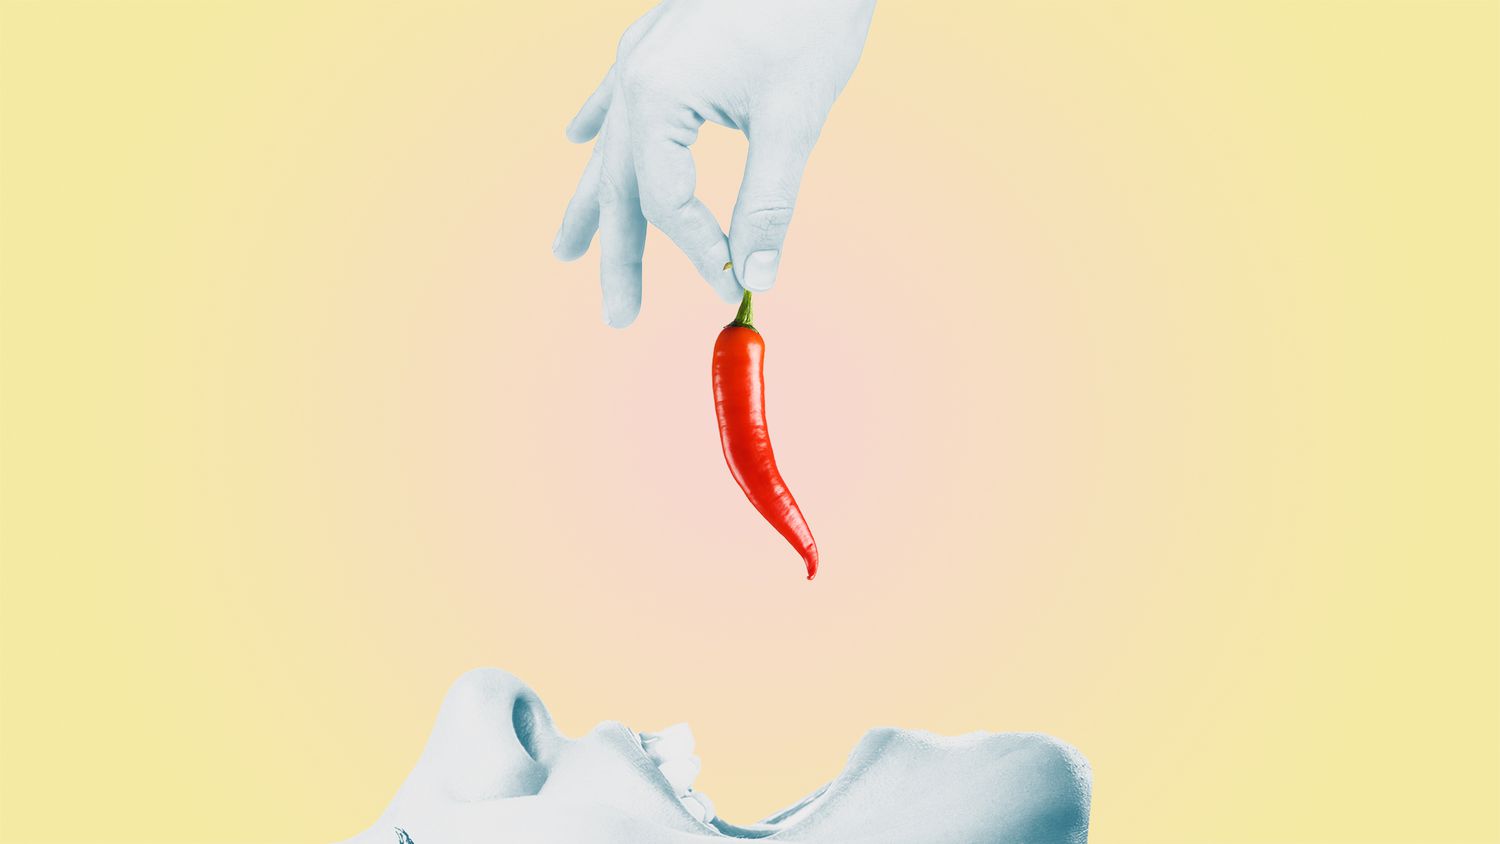 A woman eating a Red chilli pepper